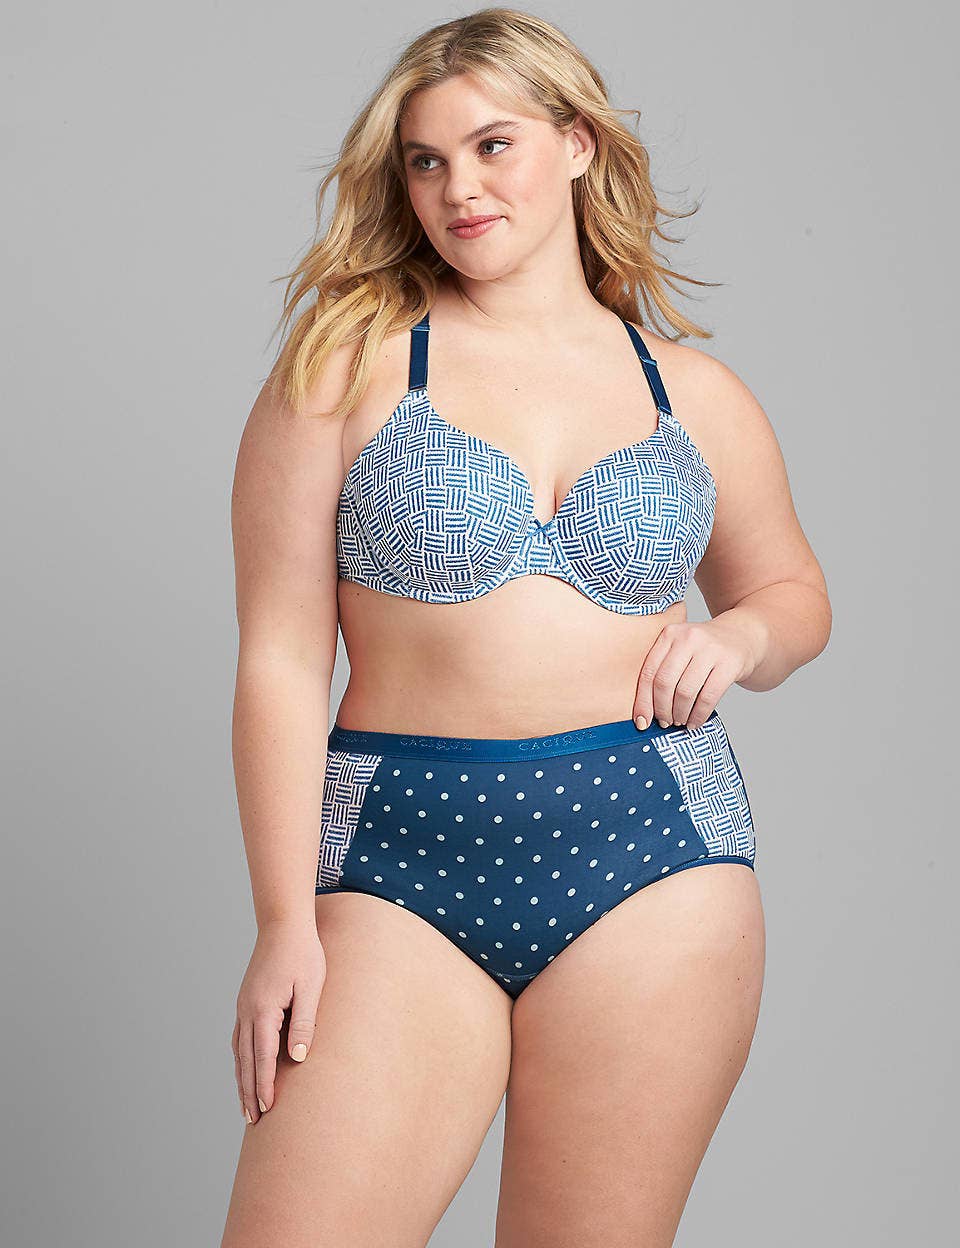 The best places to buy plus-size underwear - Reviewed